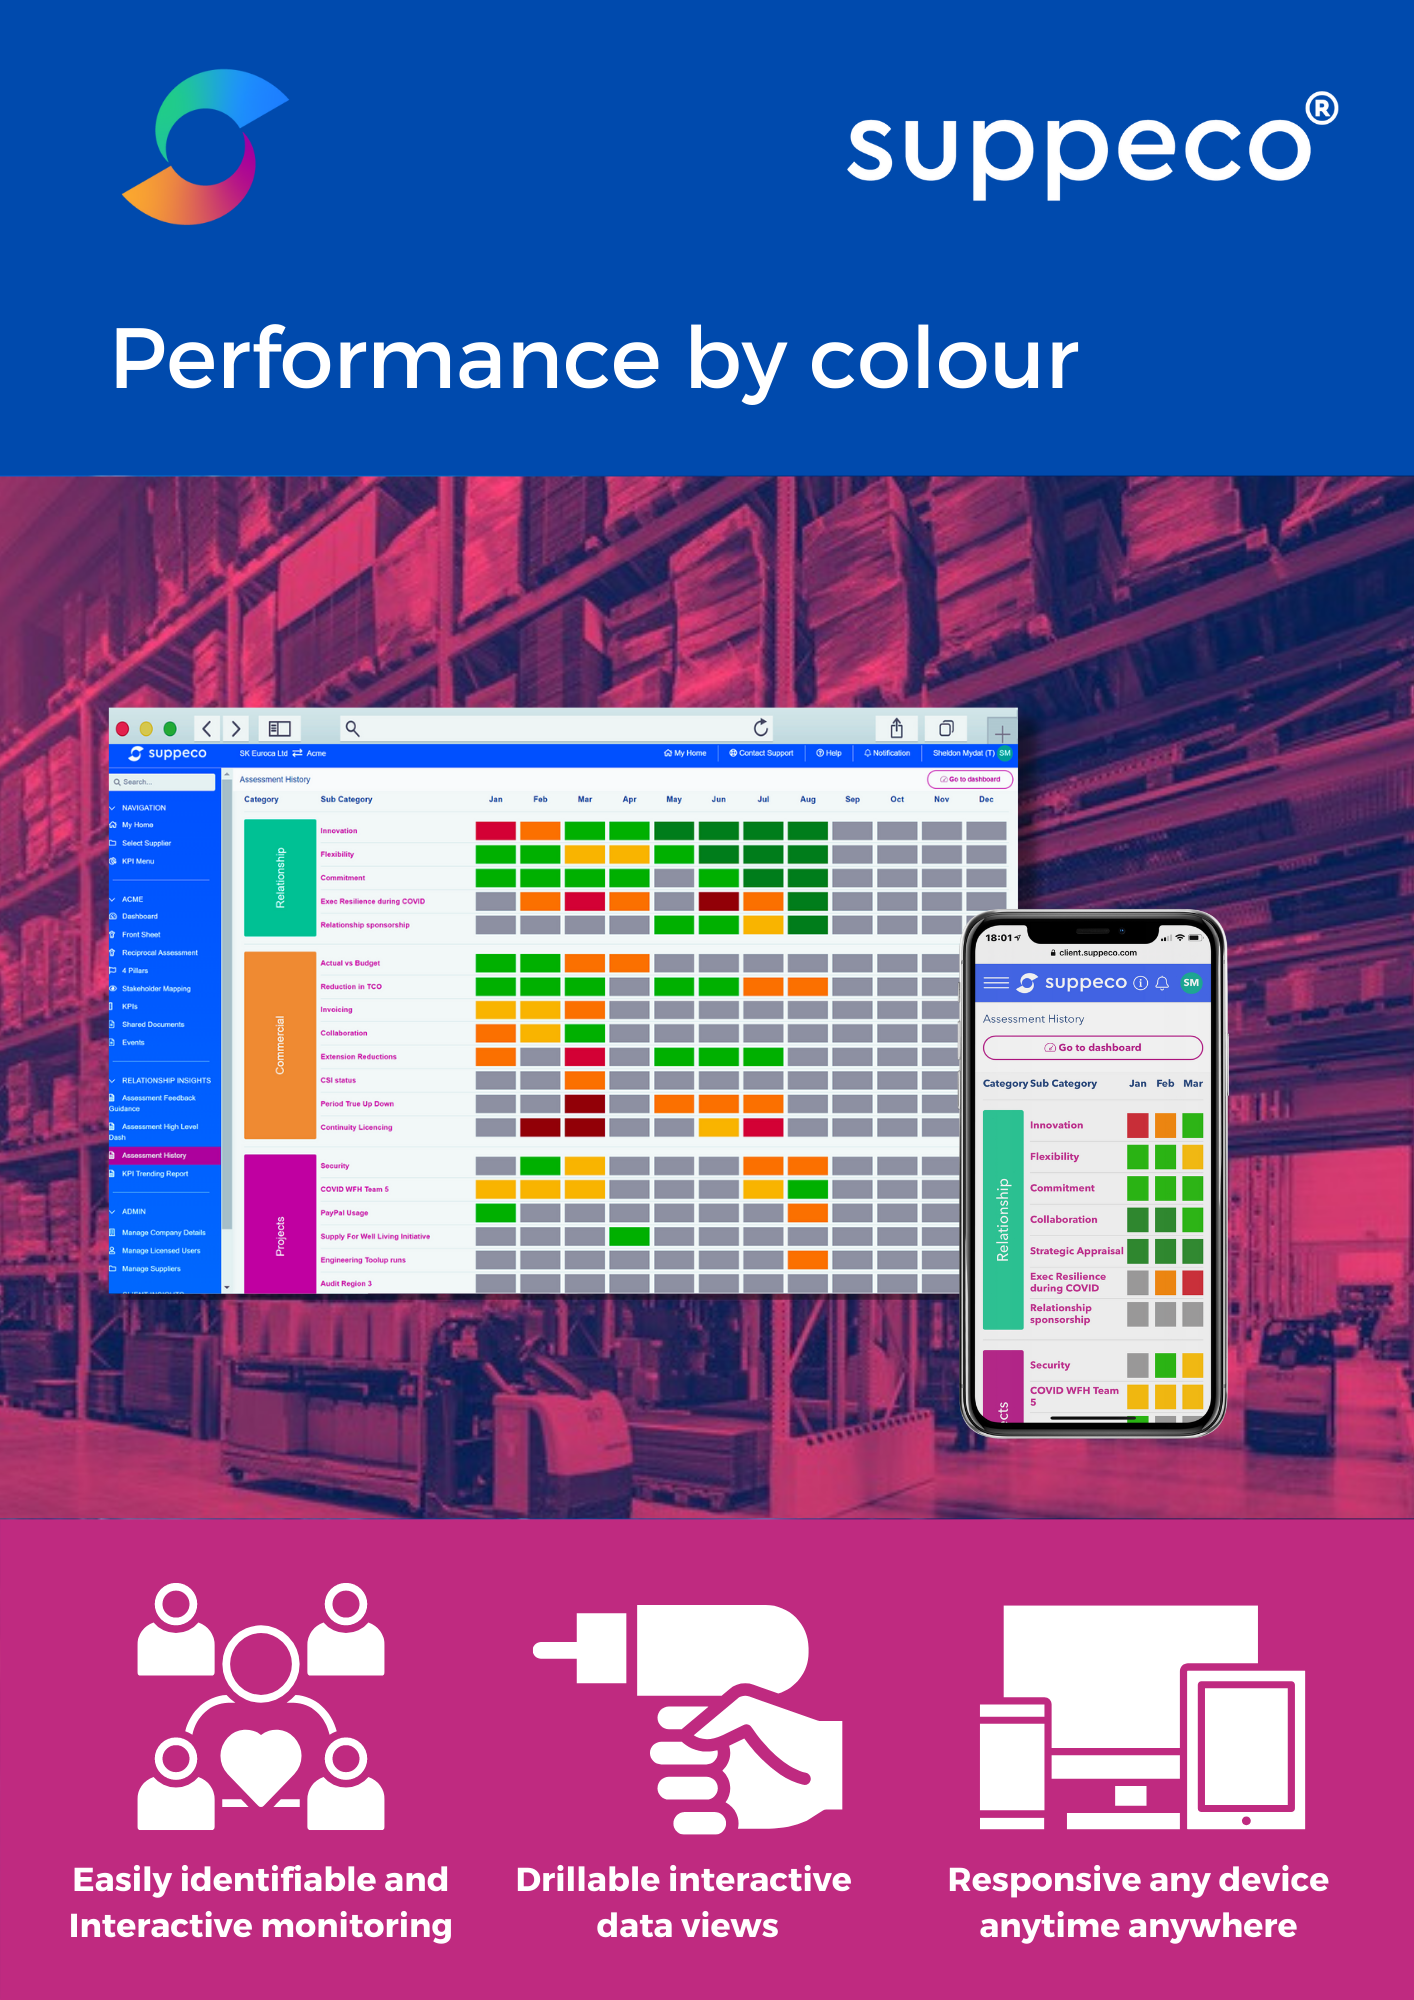 Colour mapping performance. Fully interactive drillable insights. Responsive, any device anytime anywhere.